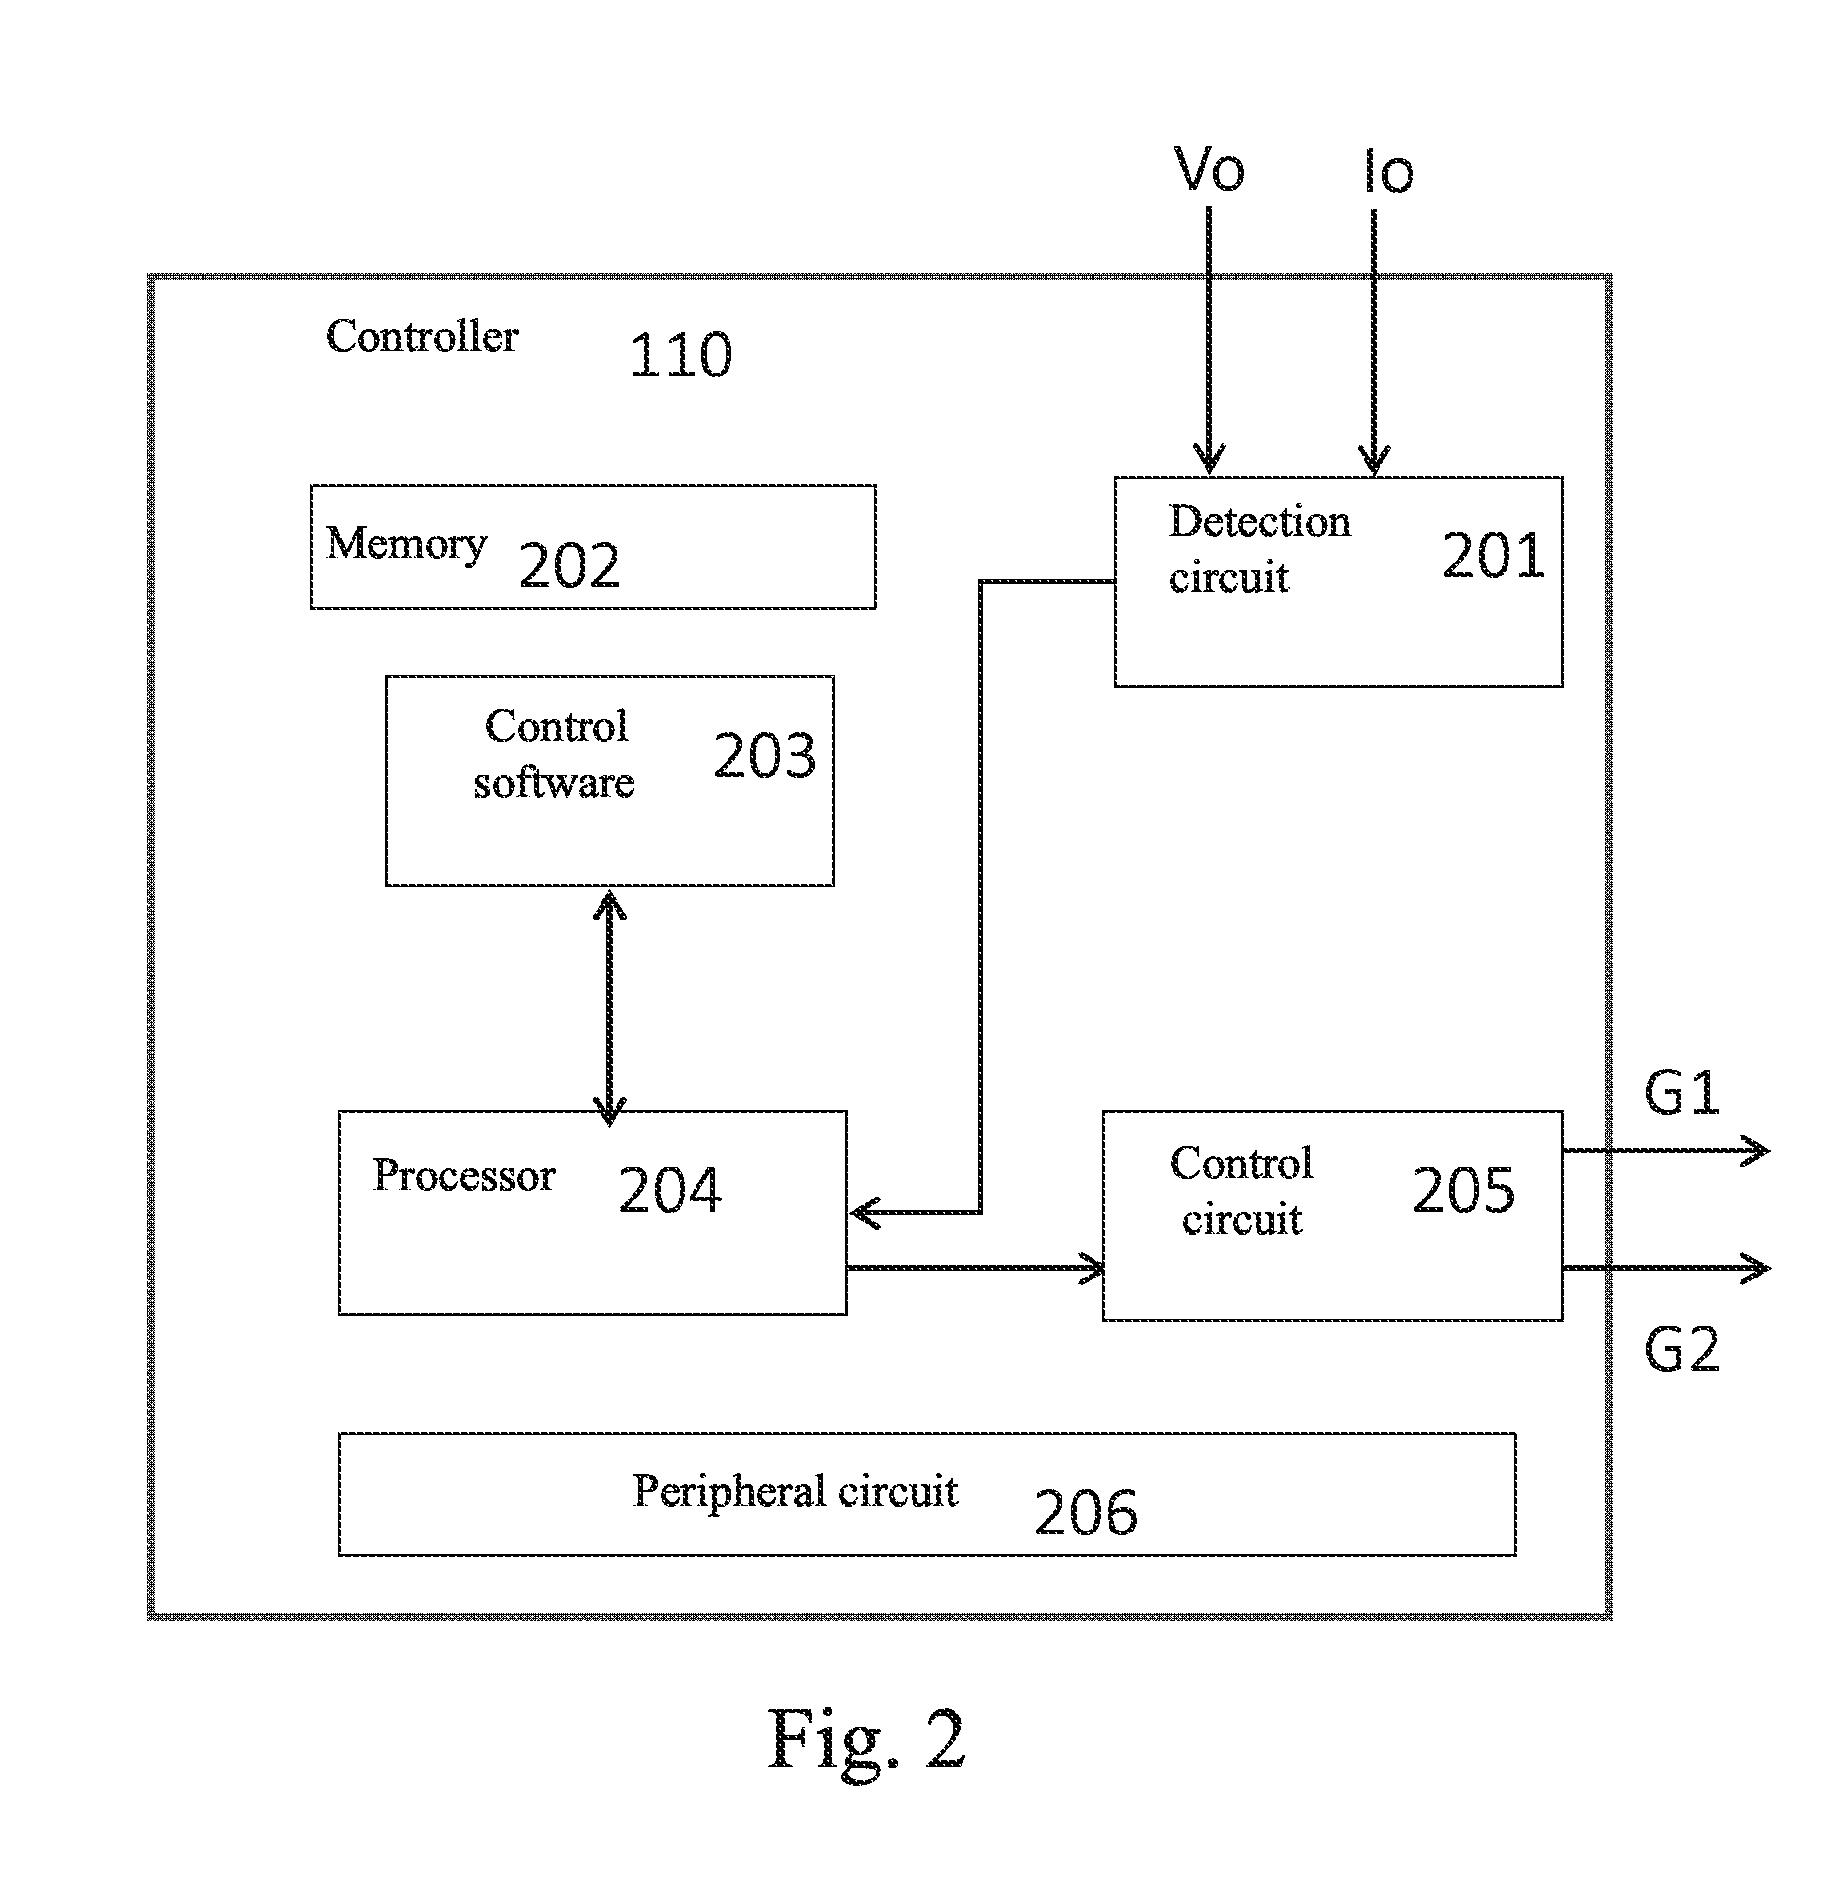 Alternating Parallel Fly Back Converter with Alternated Master-Slave Branch Circuits